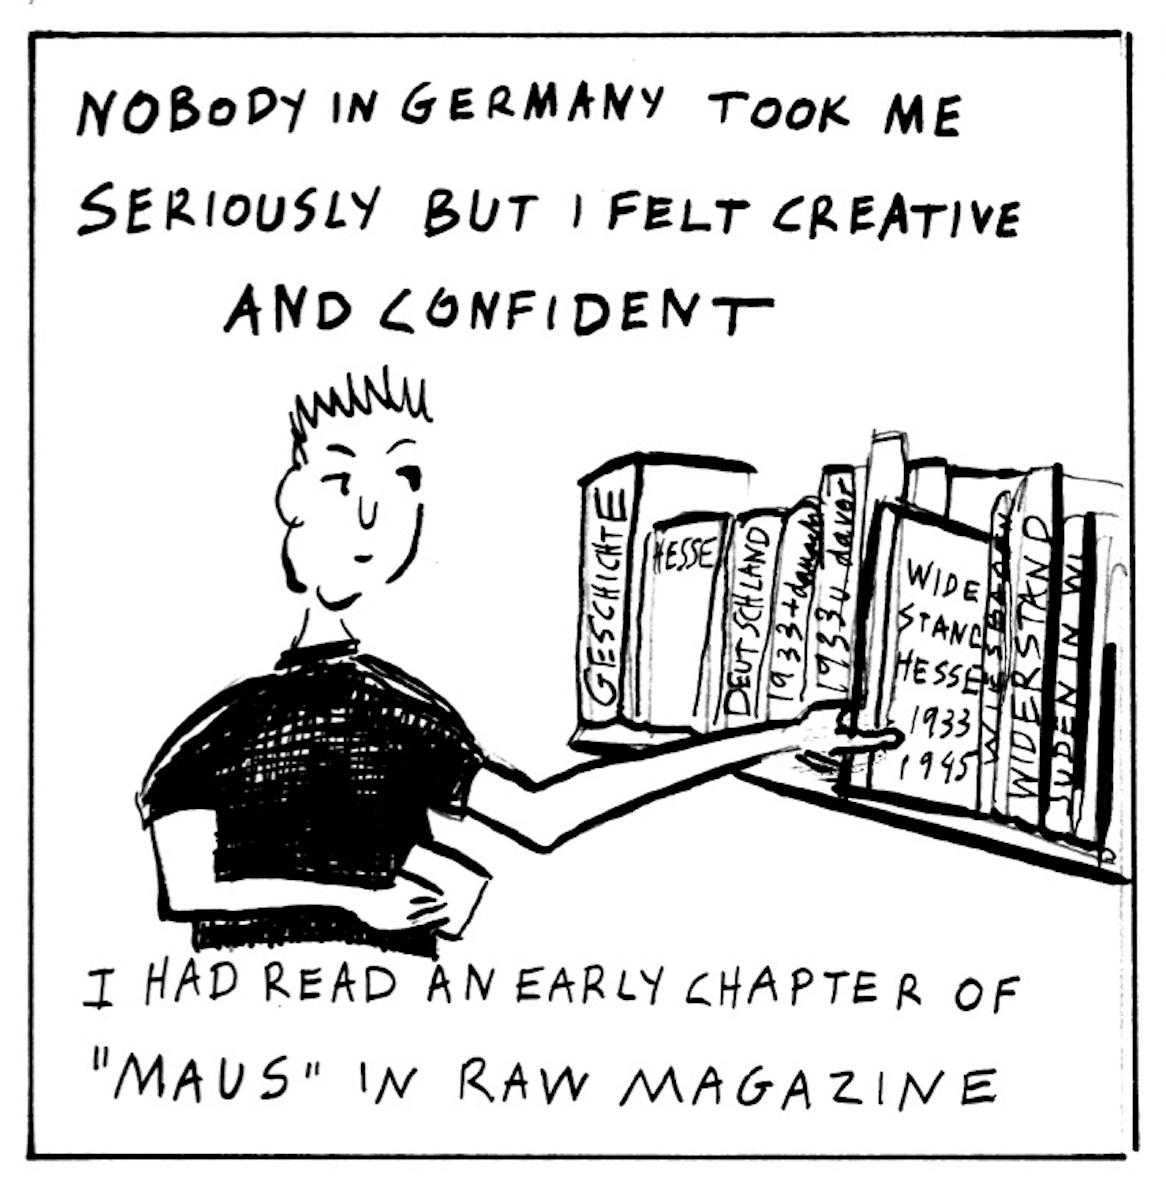 “Nobody in Germany took me seriously but I felt creative and confident. I had read an early chapter of ‘Maps’ in RAW Magazine.”